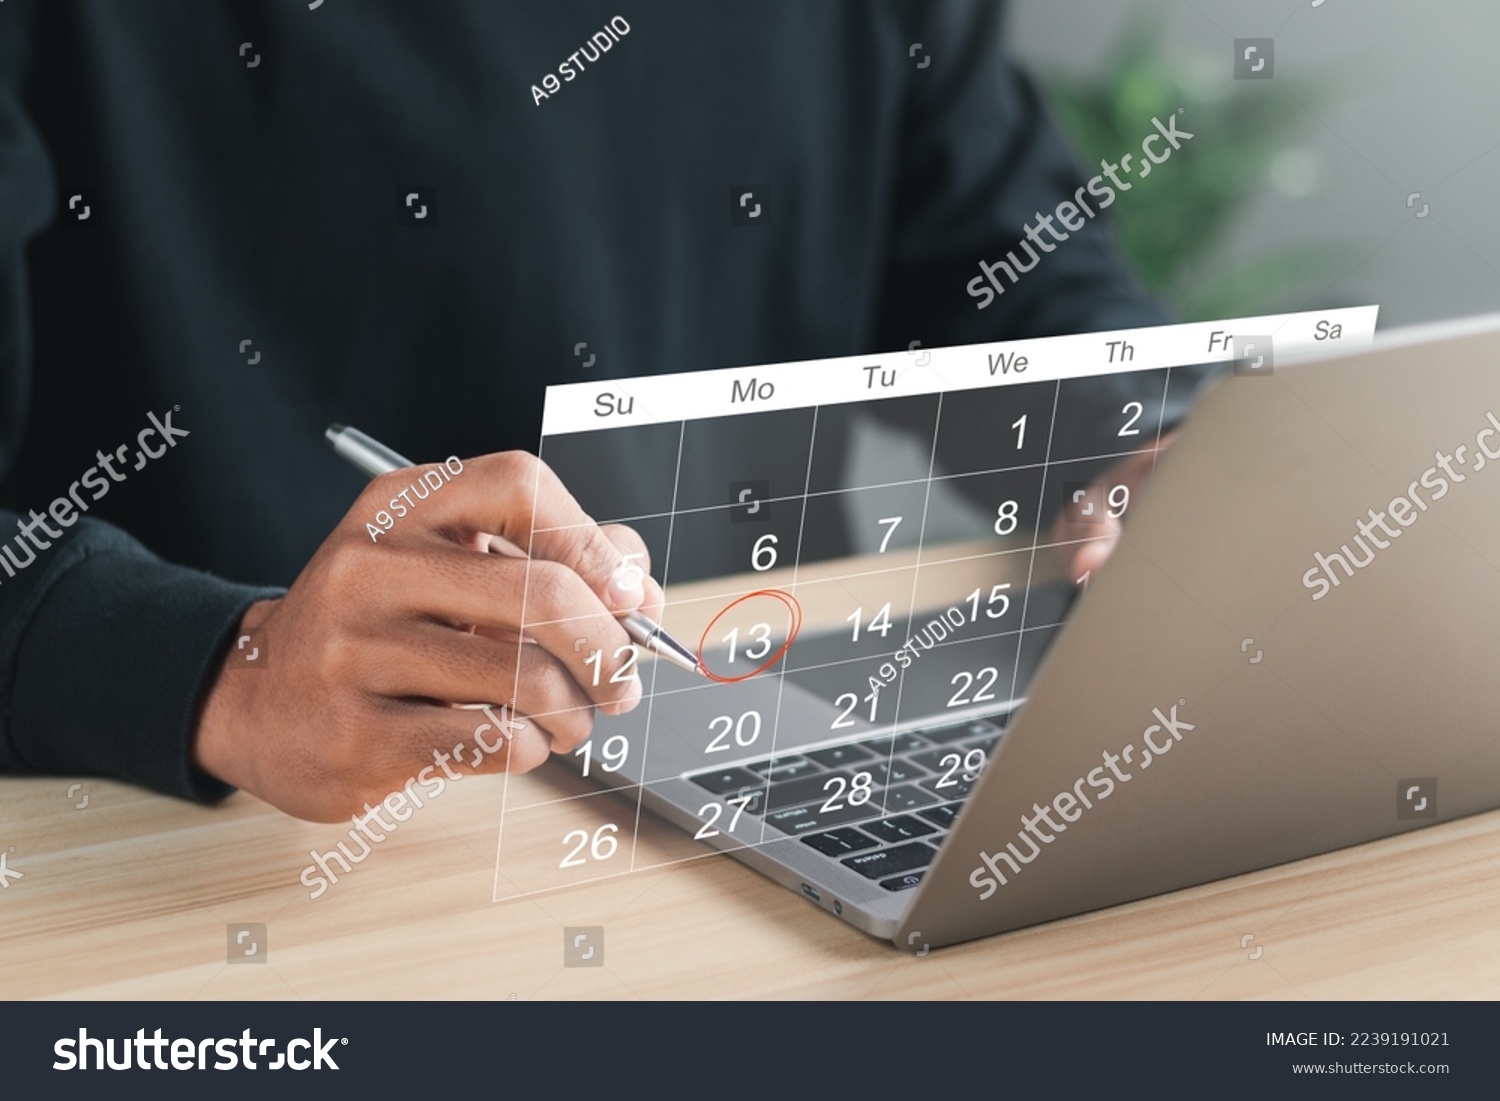 Businessman manages time for effective work. Calendar on the virtual screen interface. Highlight appointment reminders and meeting agenda on the calendar. Time management concept. #2239191021